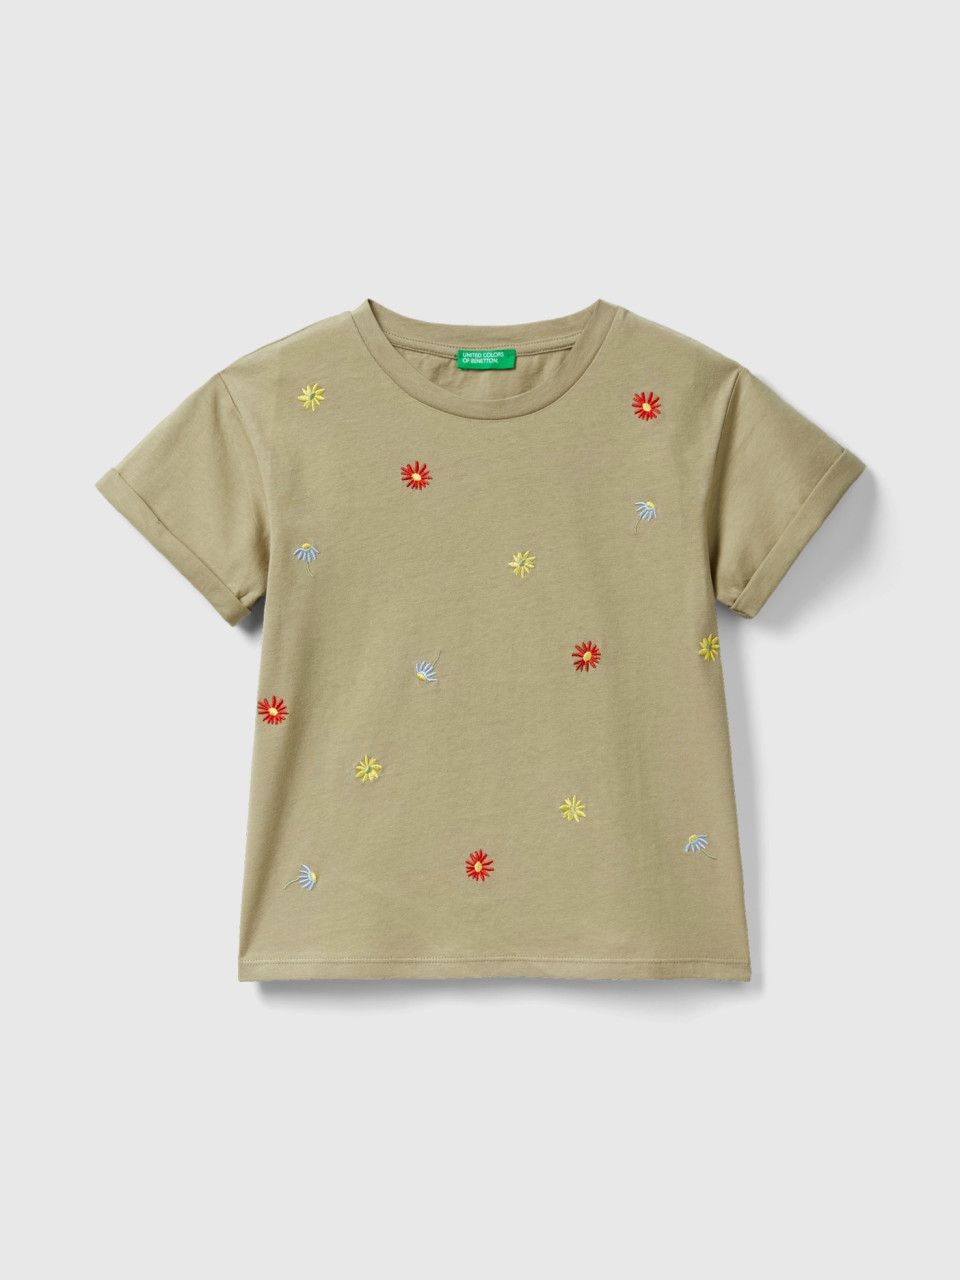 Benetton, T-shirt With Embroidered Flowers, Light Green, Kids